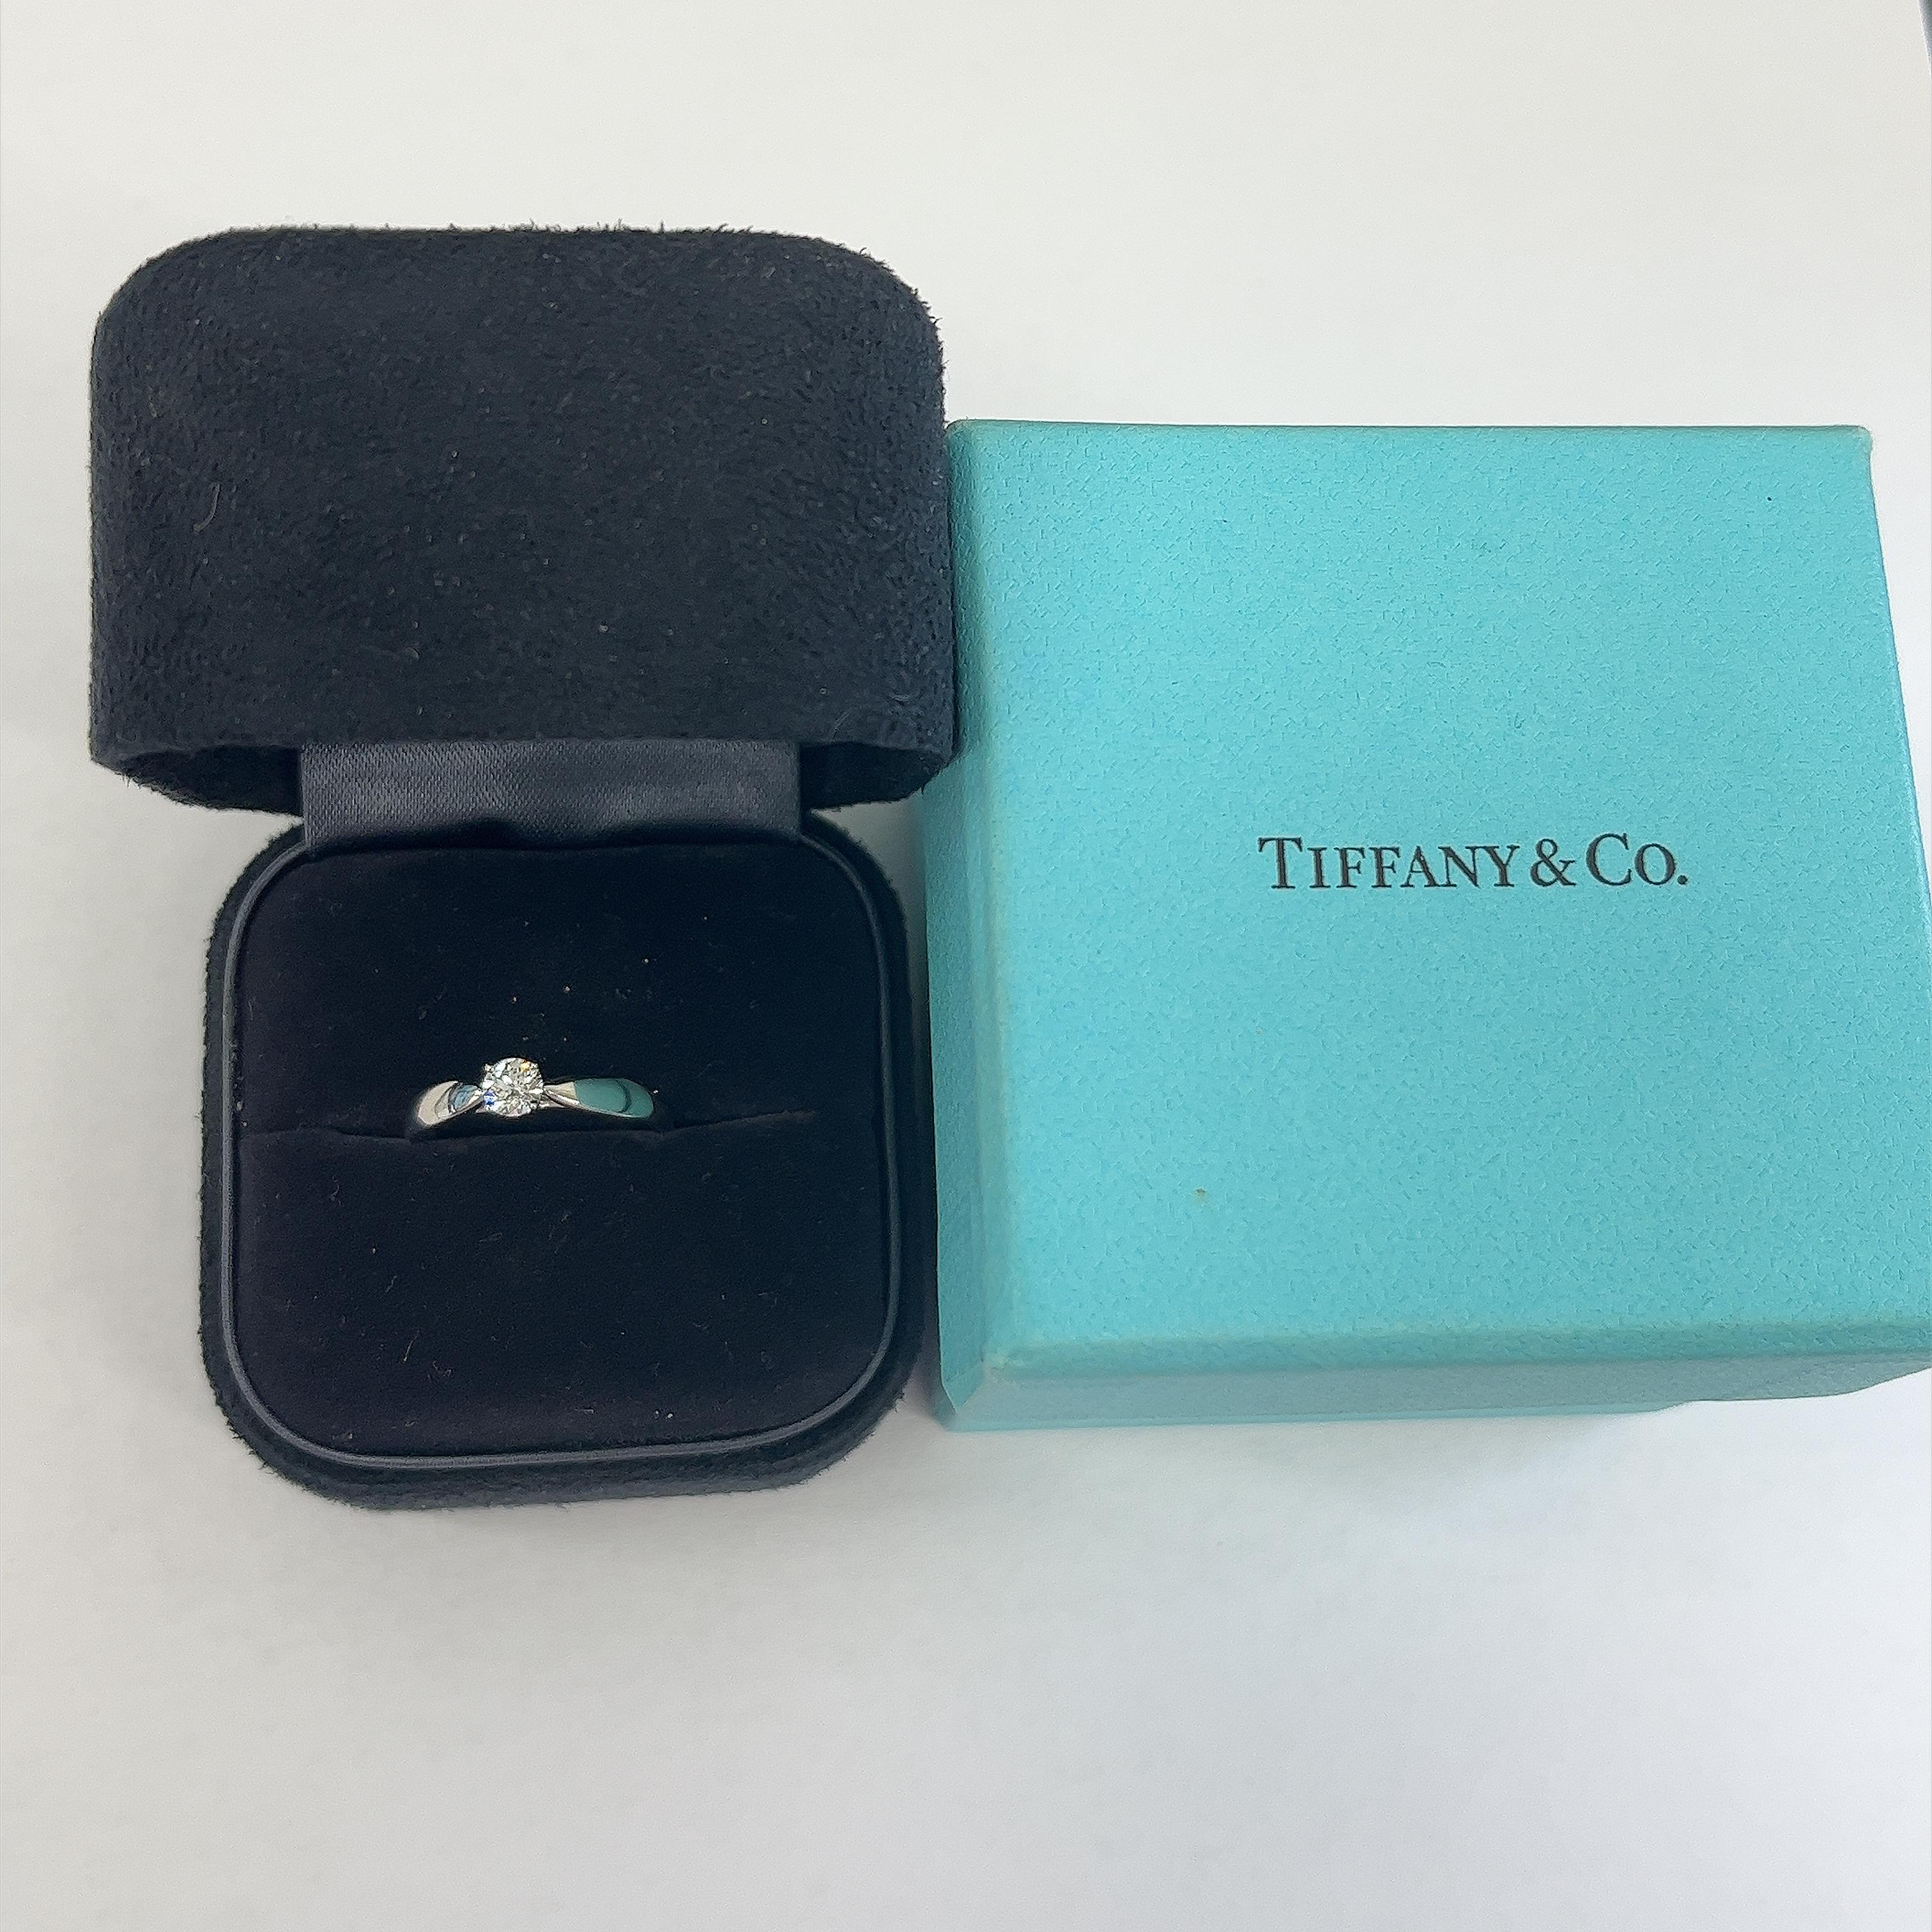 Classic Tiffany & Co. Solitaire Diamond Ring in Platinum with a 0.22ct Diamond For Sale 1